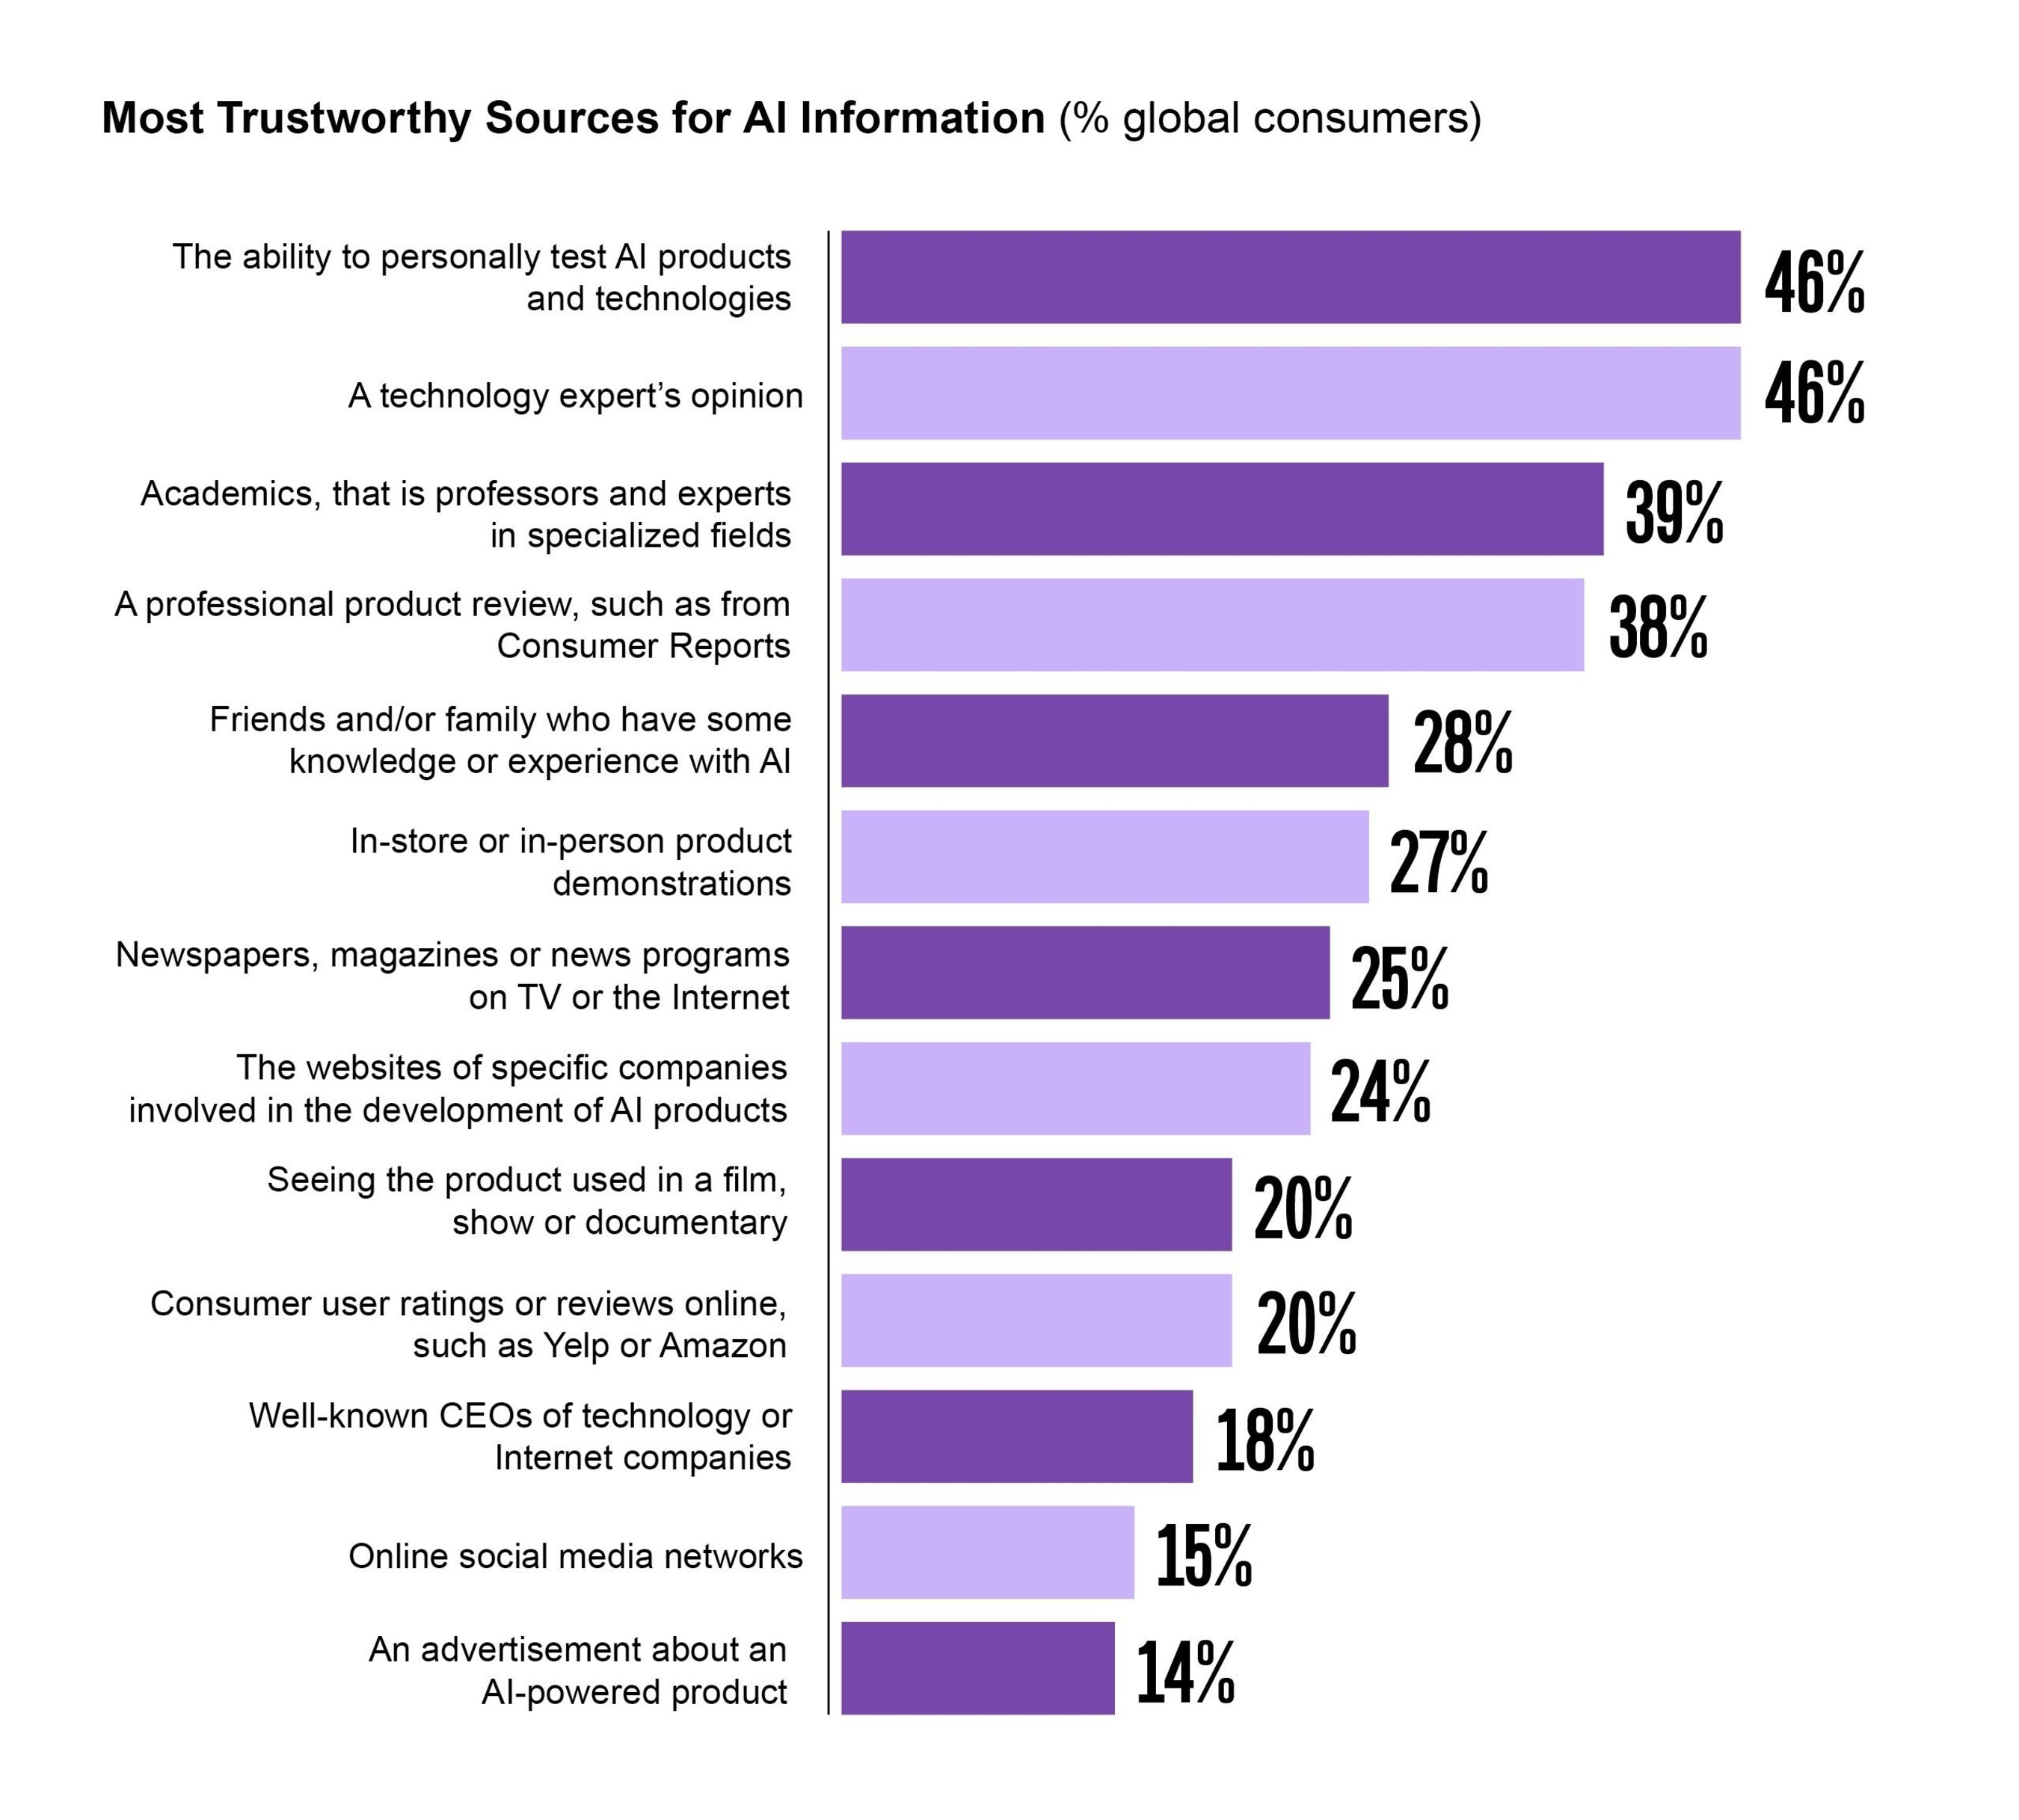 Most Trustworthy Sources for AI Information